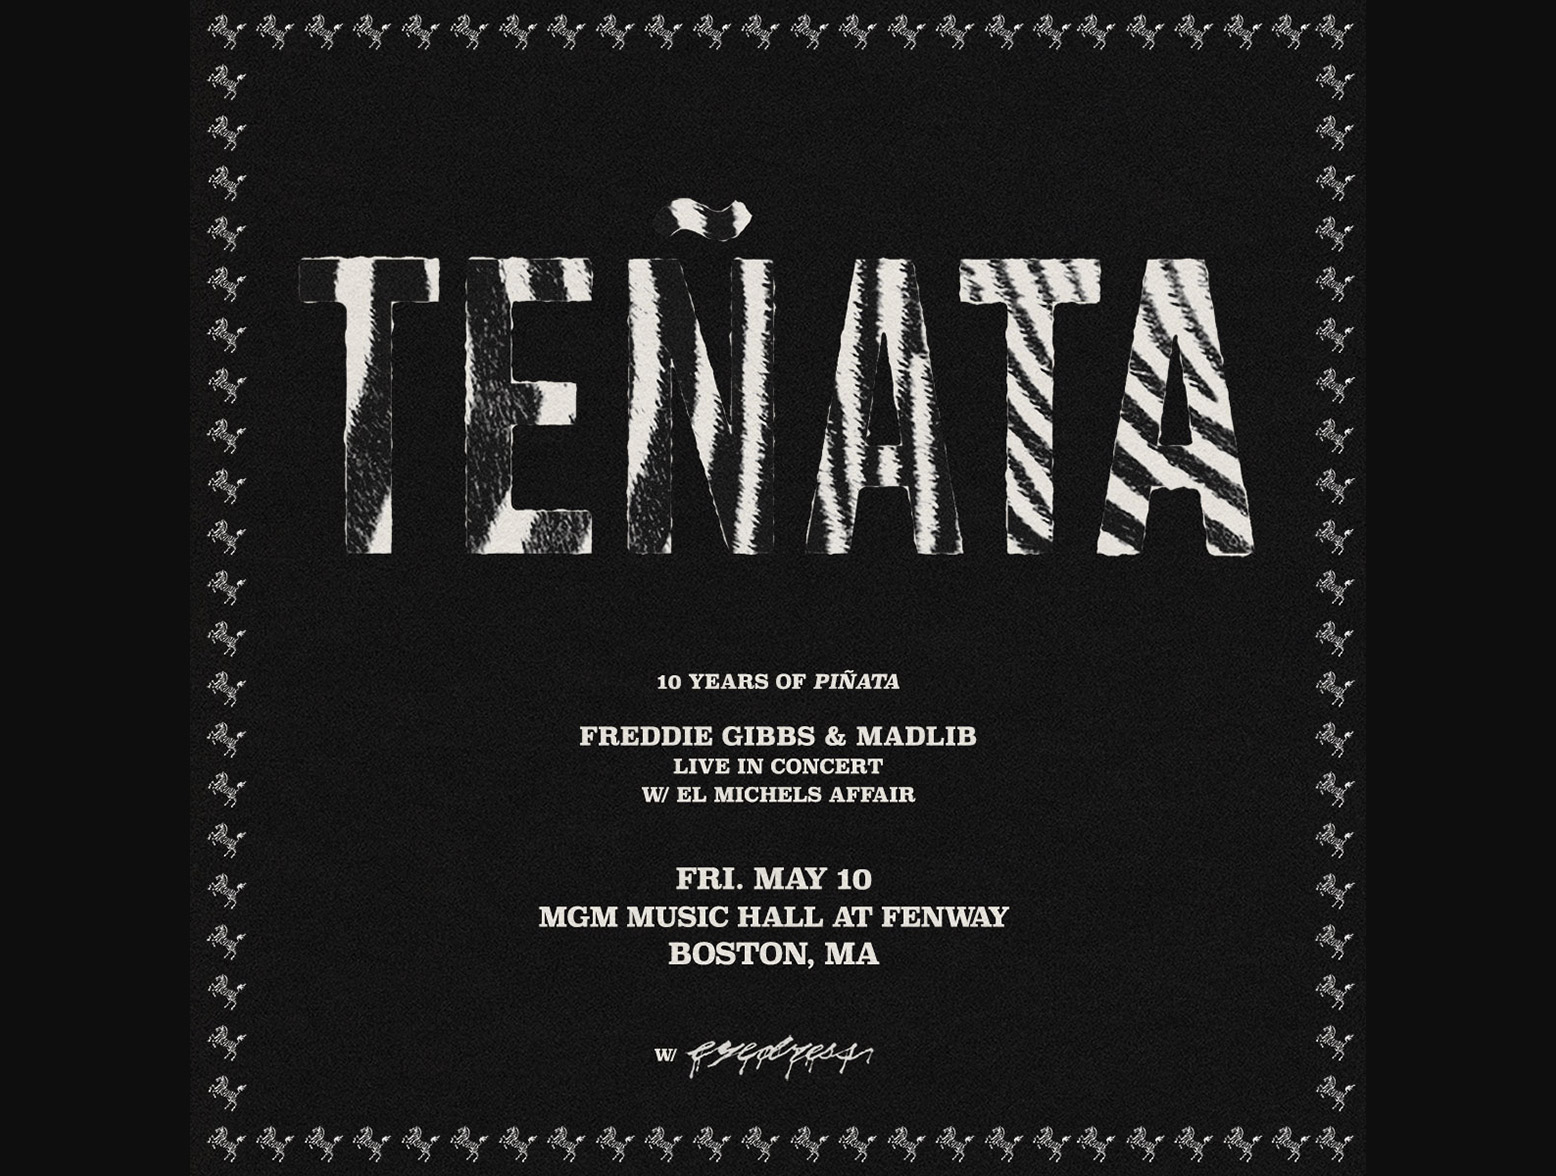 Tenata Tour artwork: F10 years of Pinata: Freddie Gibbs & Madlib live in concert w/ El Michels Affair on Friday, May 10th at MGM Music Hall at Fenway in Boston, MA! Zebra striped text with black background.